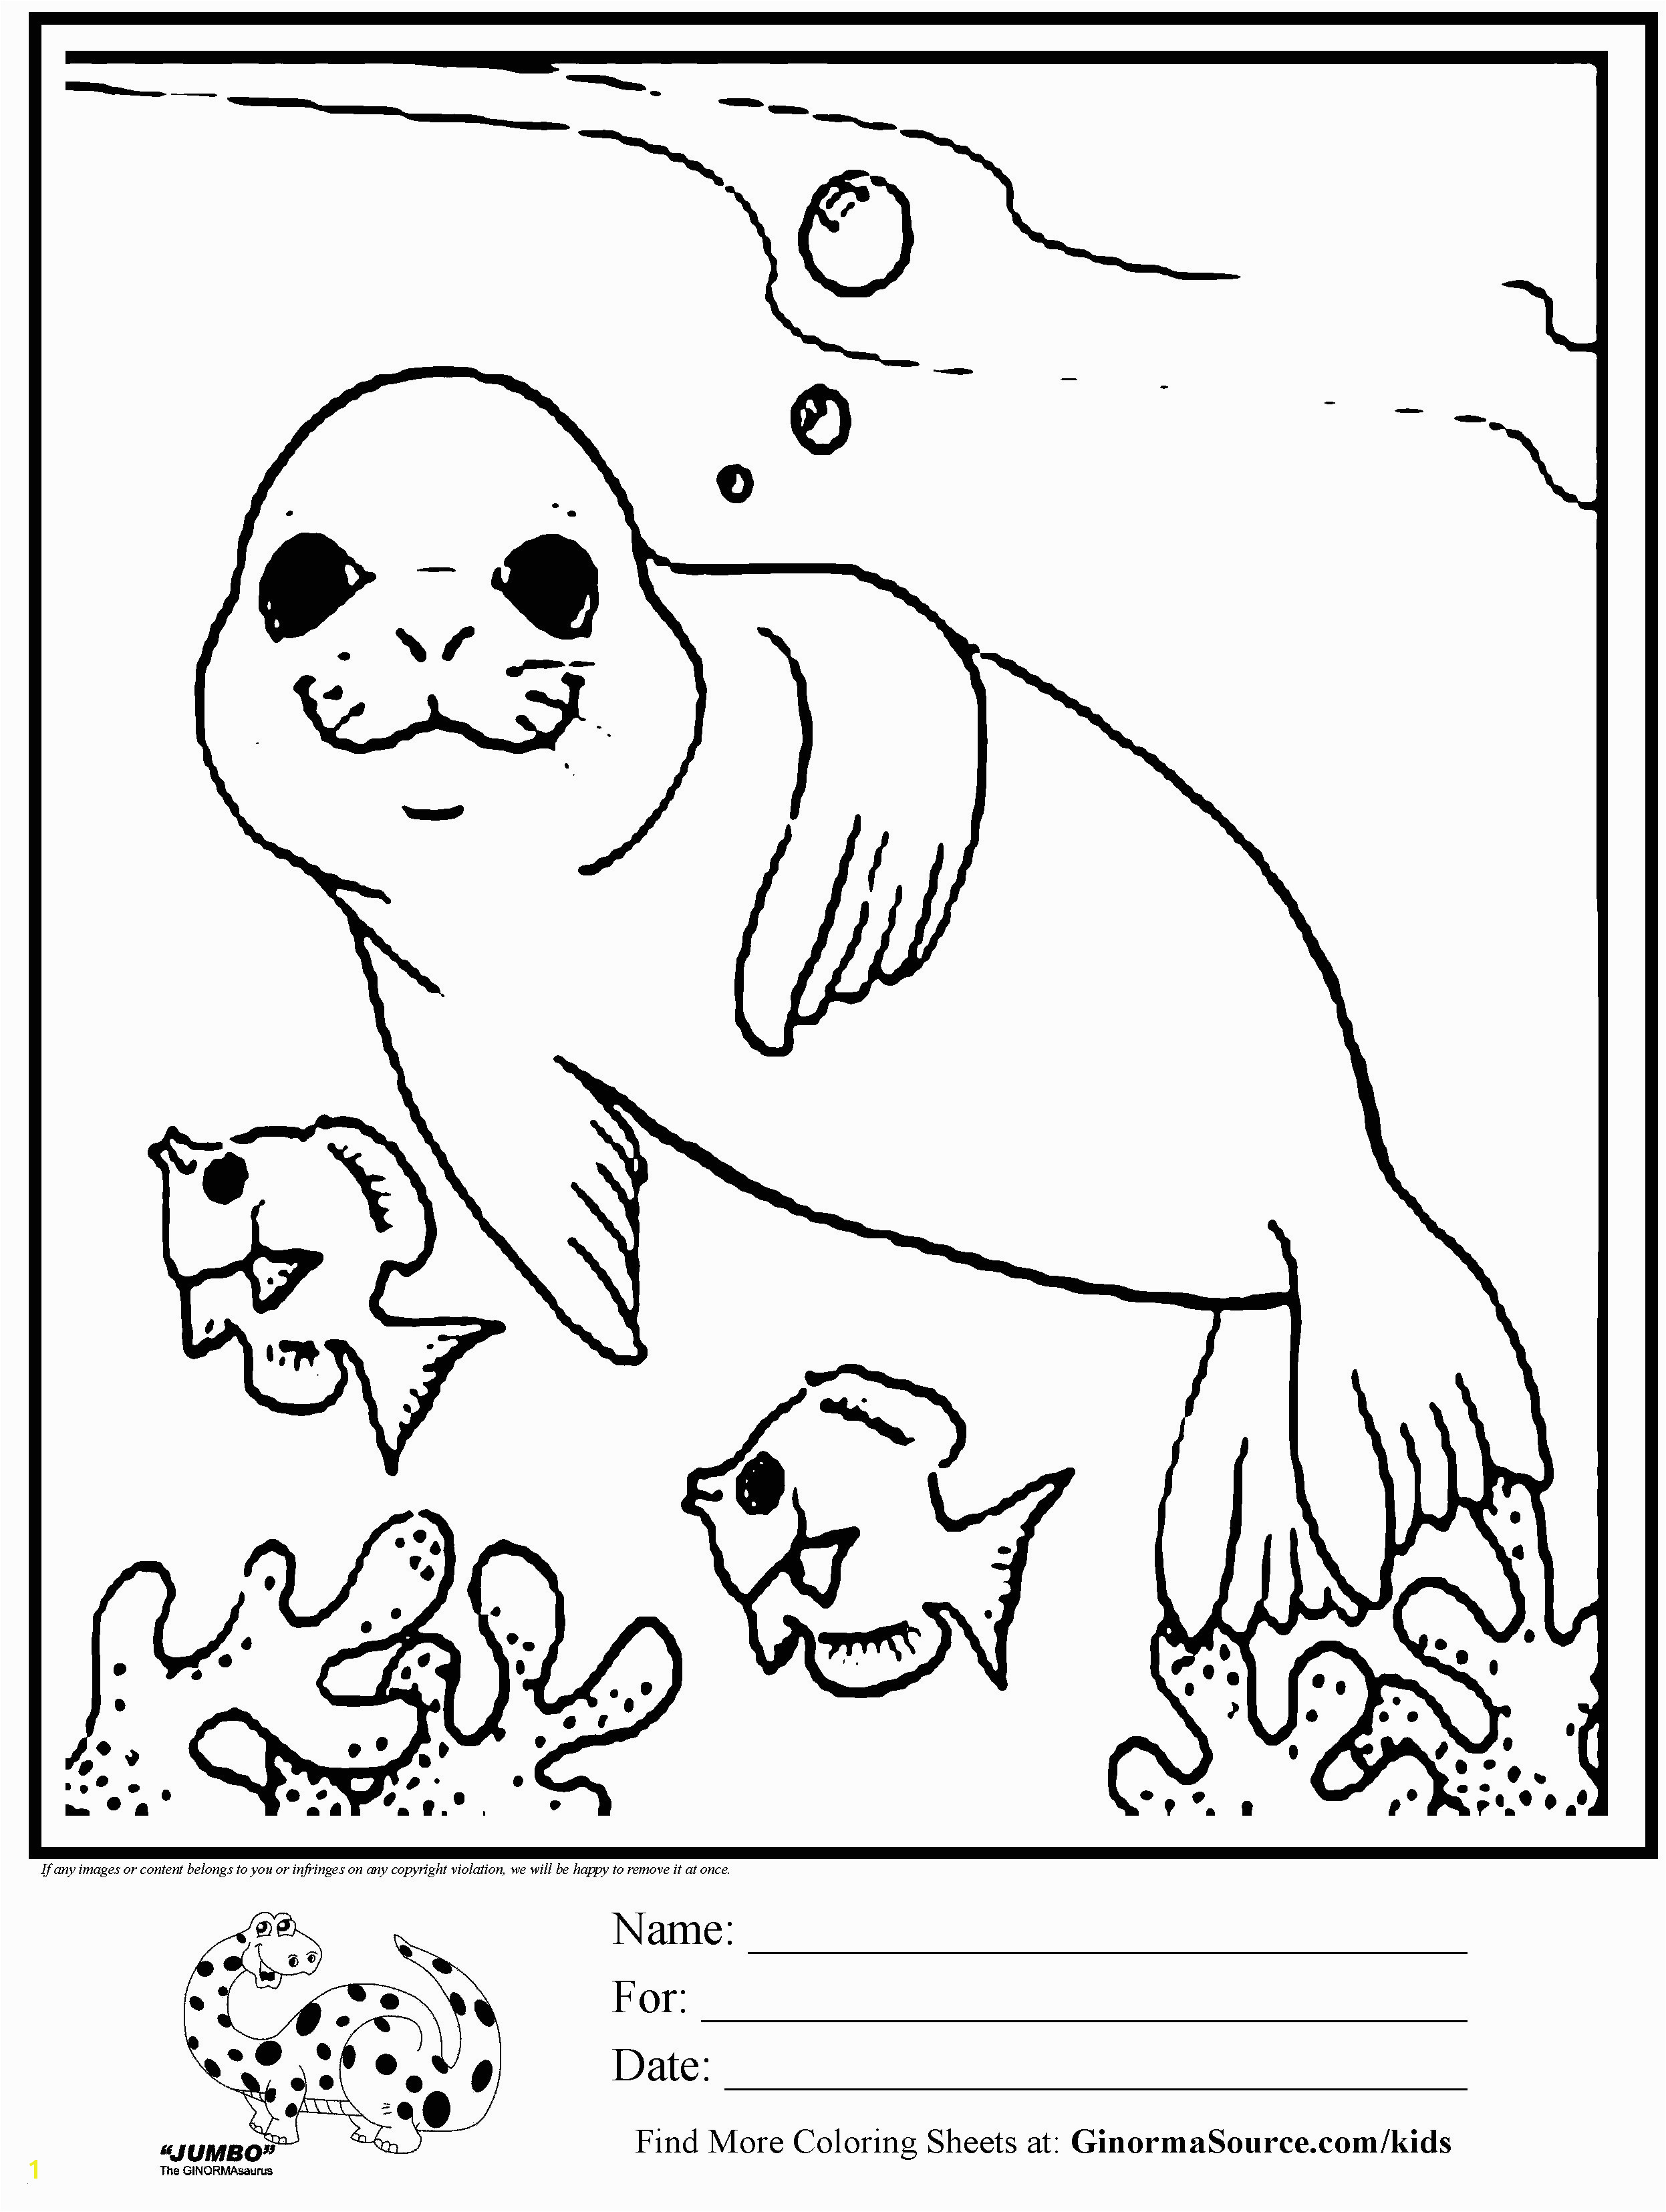 Dinosaurs Coloring Pages Awesome Free Coloring Pages for Boys Best Printable Od Dog Coloring Pages